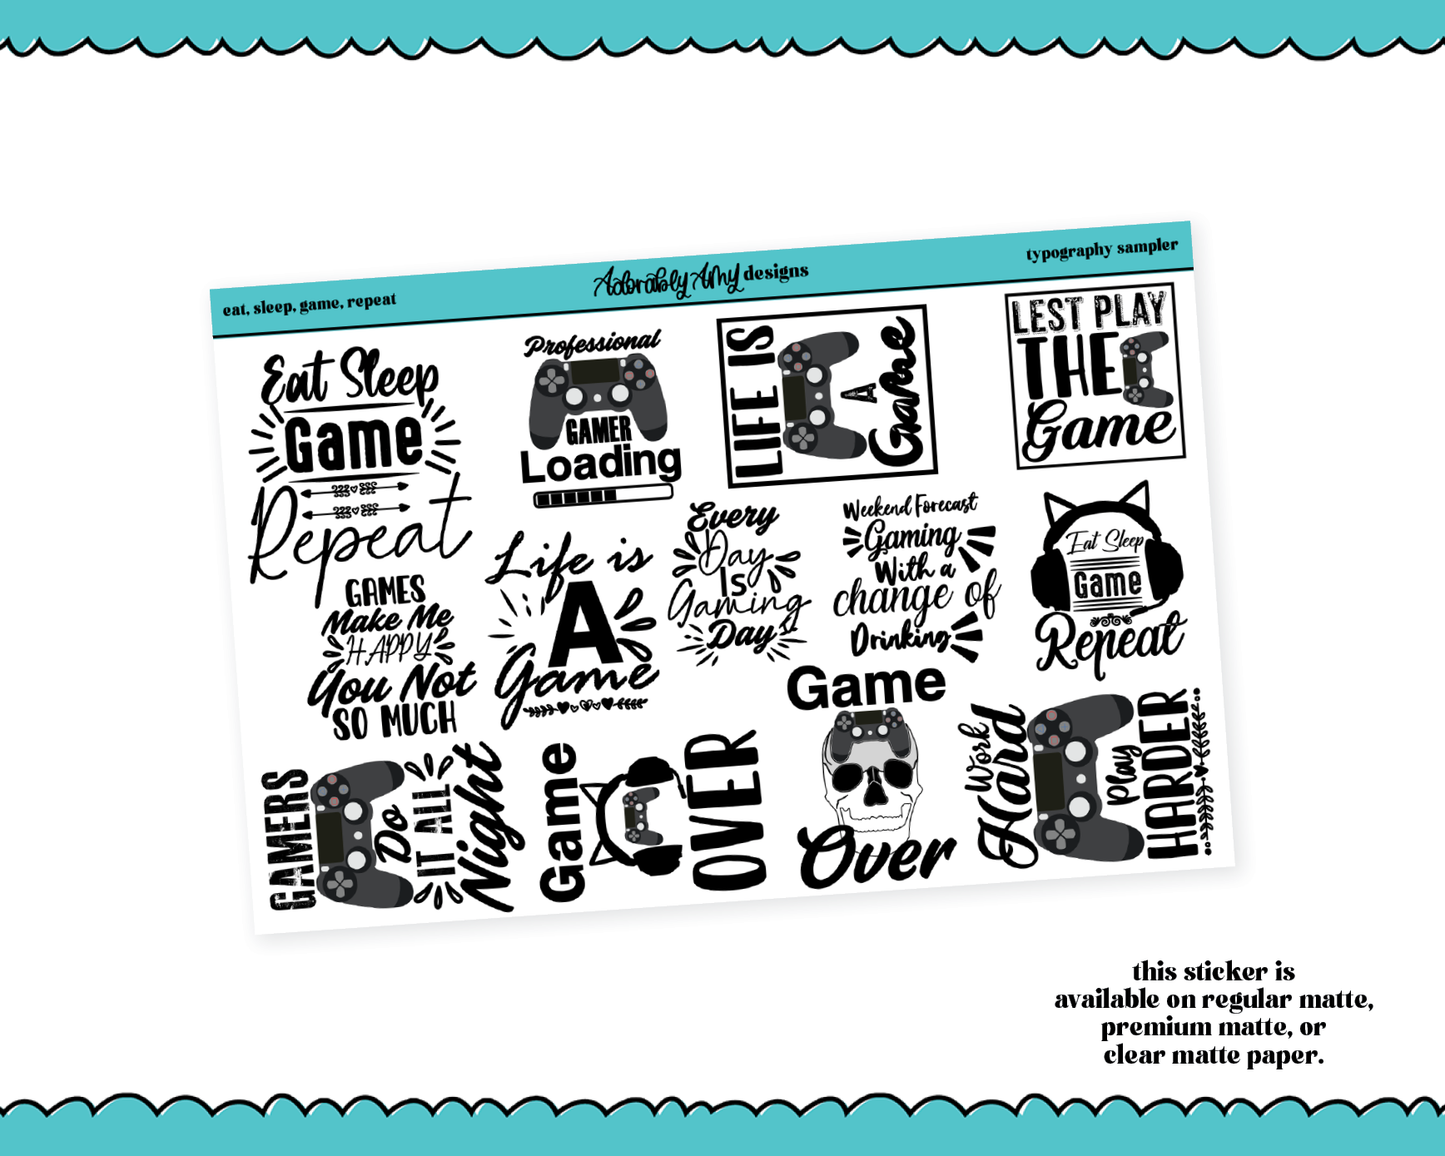 Eat, Sleep, Game, Repeat Typography Sampler Planner Stickers for any Planner or Insert